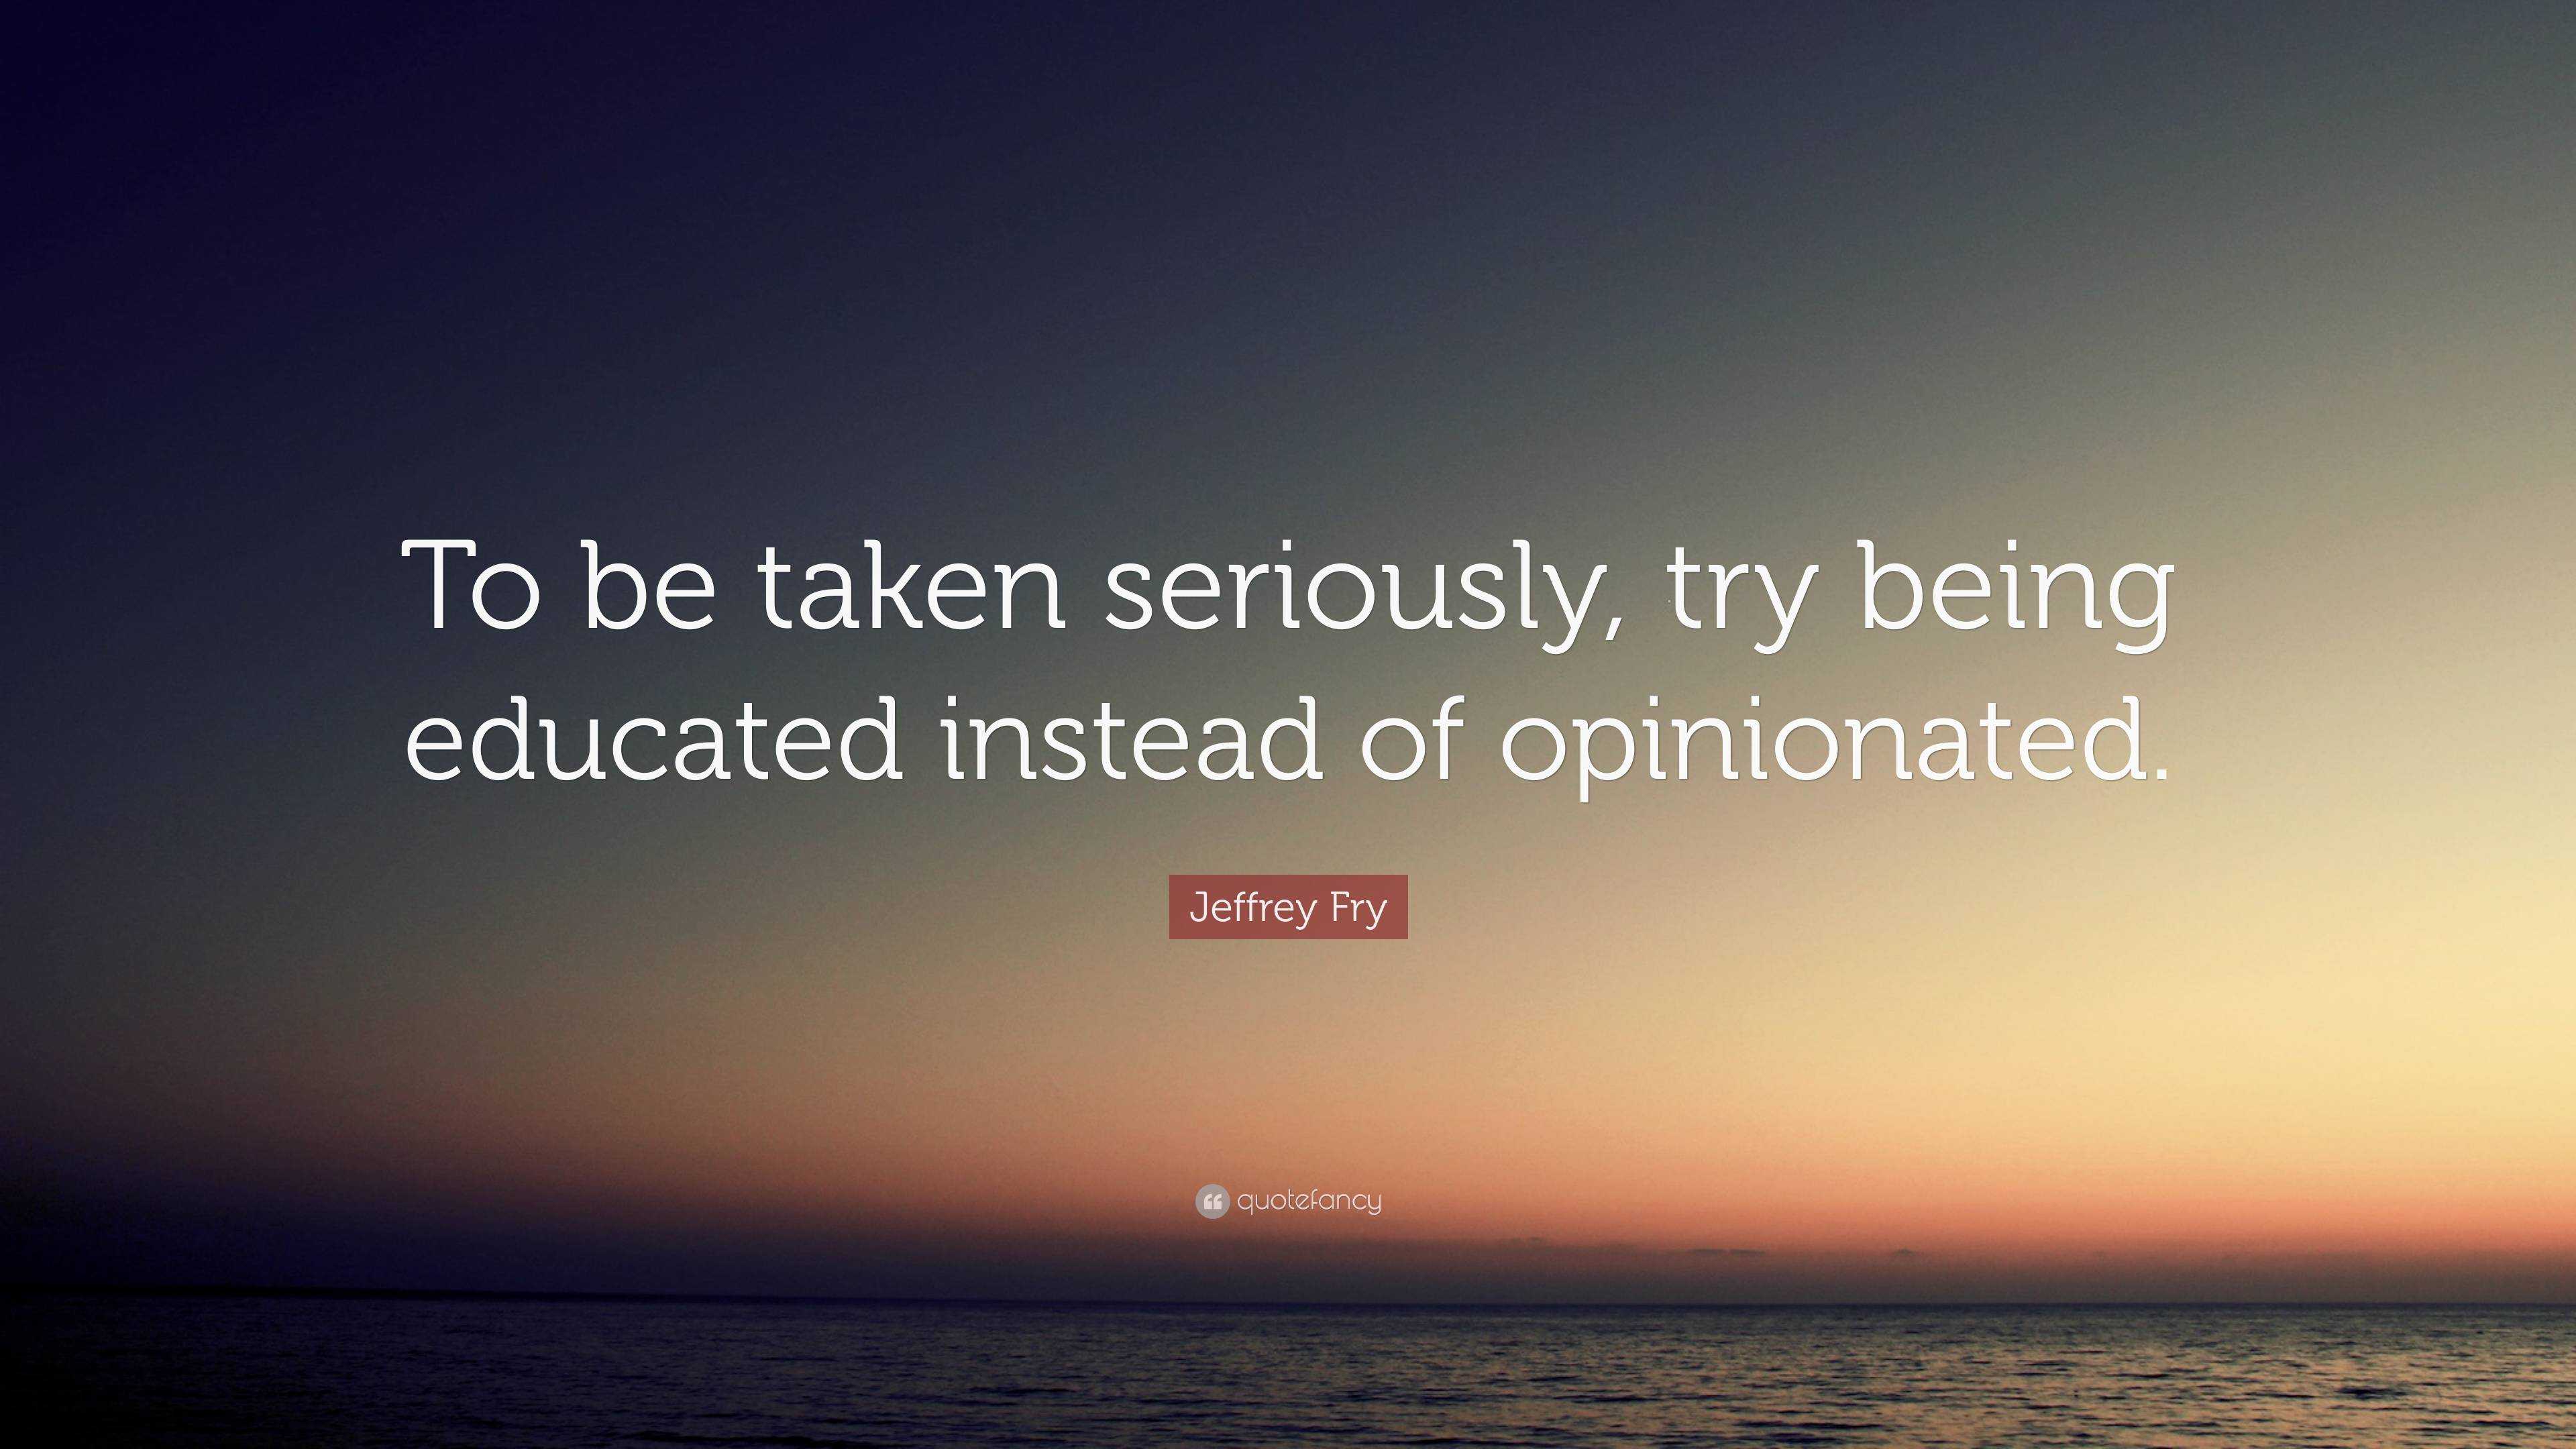 Jeffrey Fry Quote “to Be Taken Seriously Try Being Educated Instead Of Opinionated” 